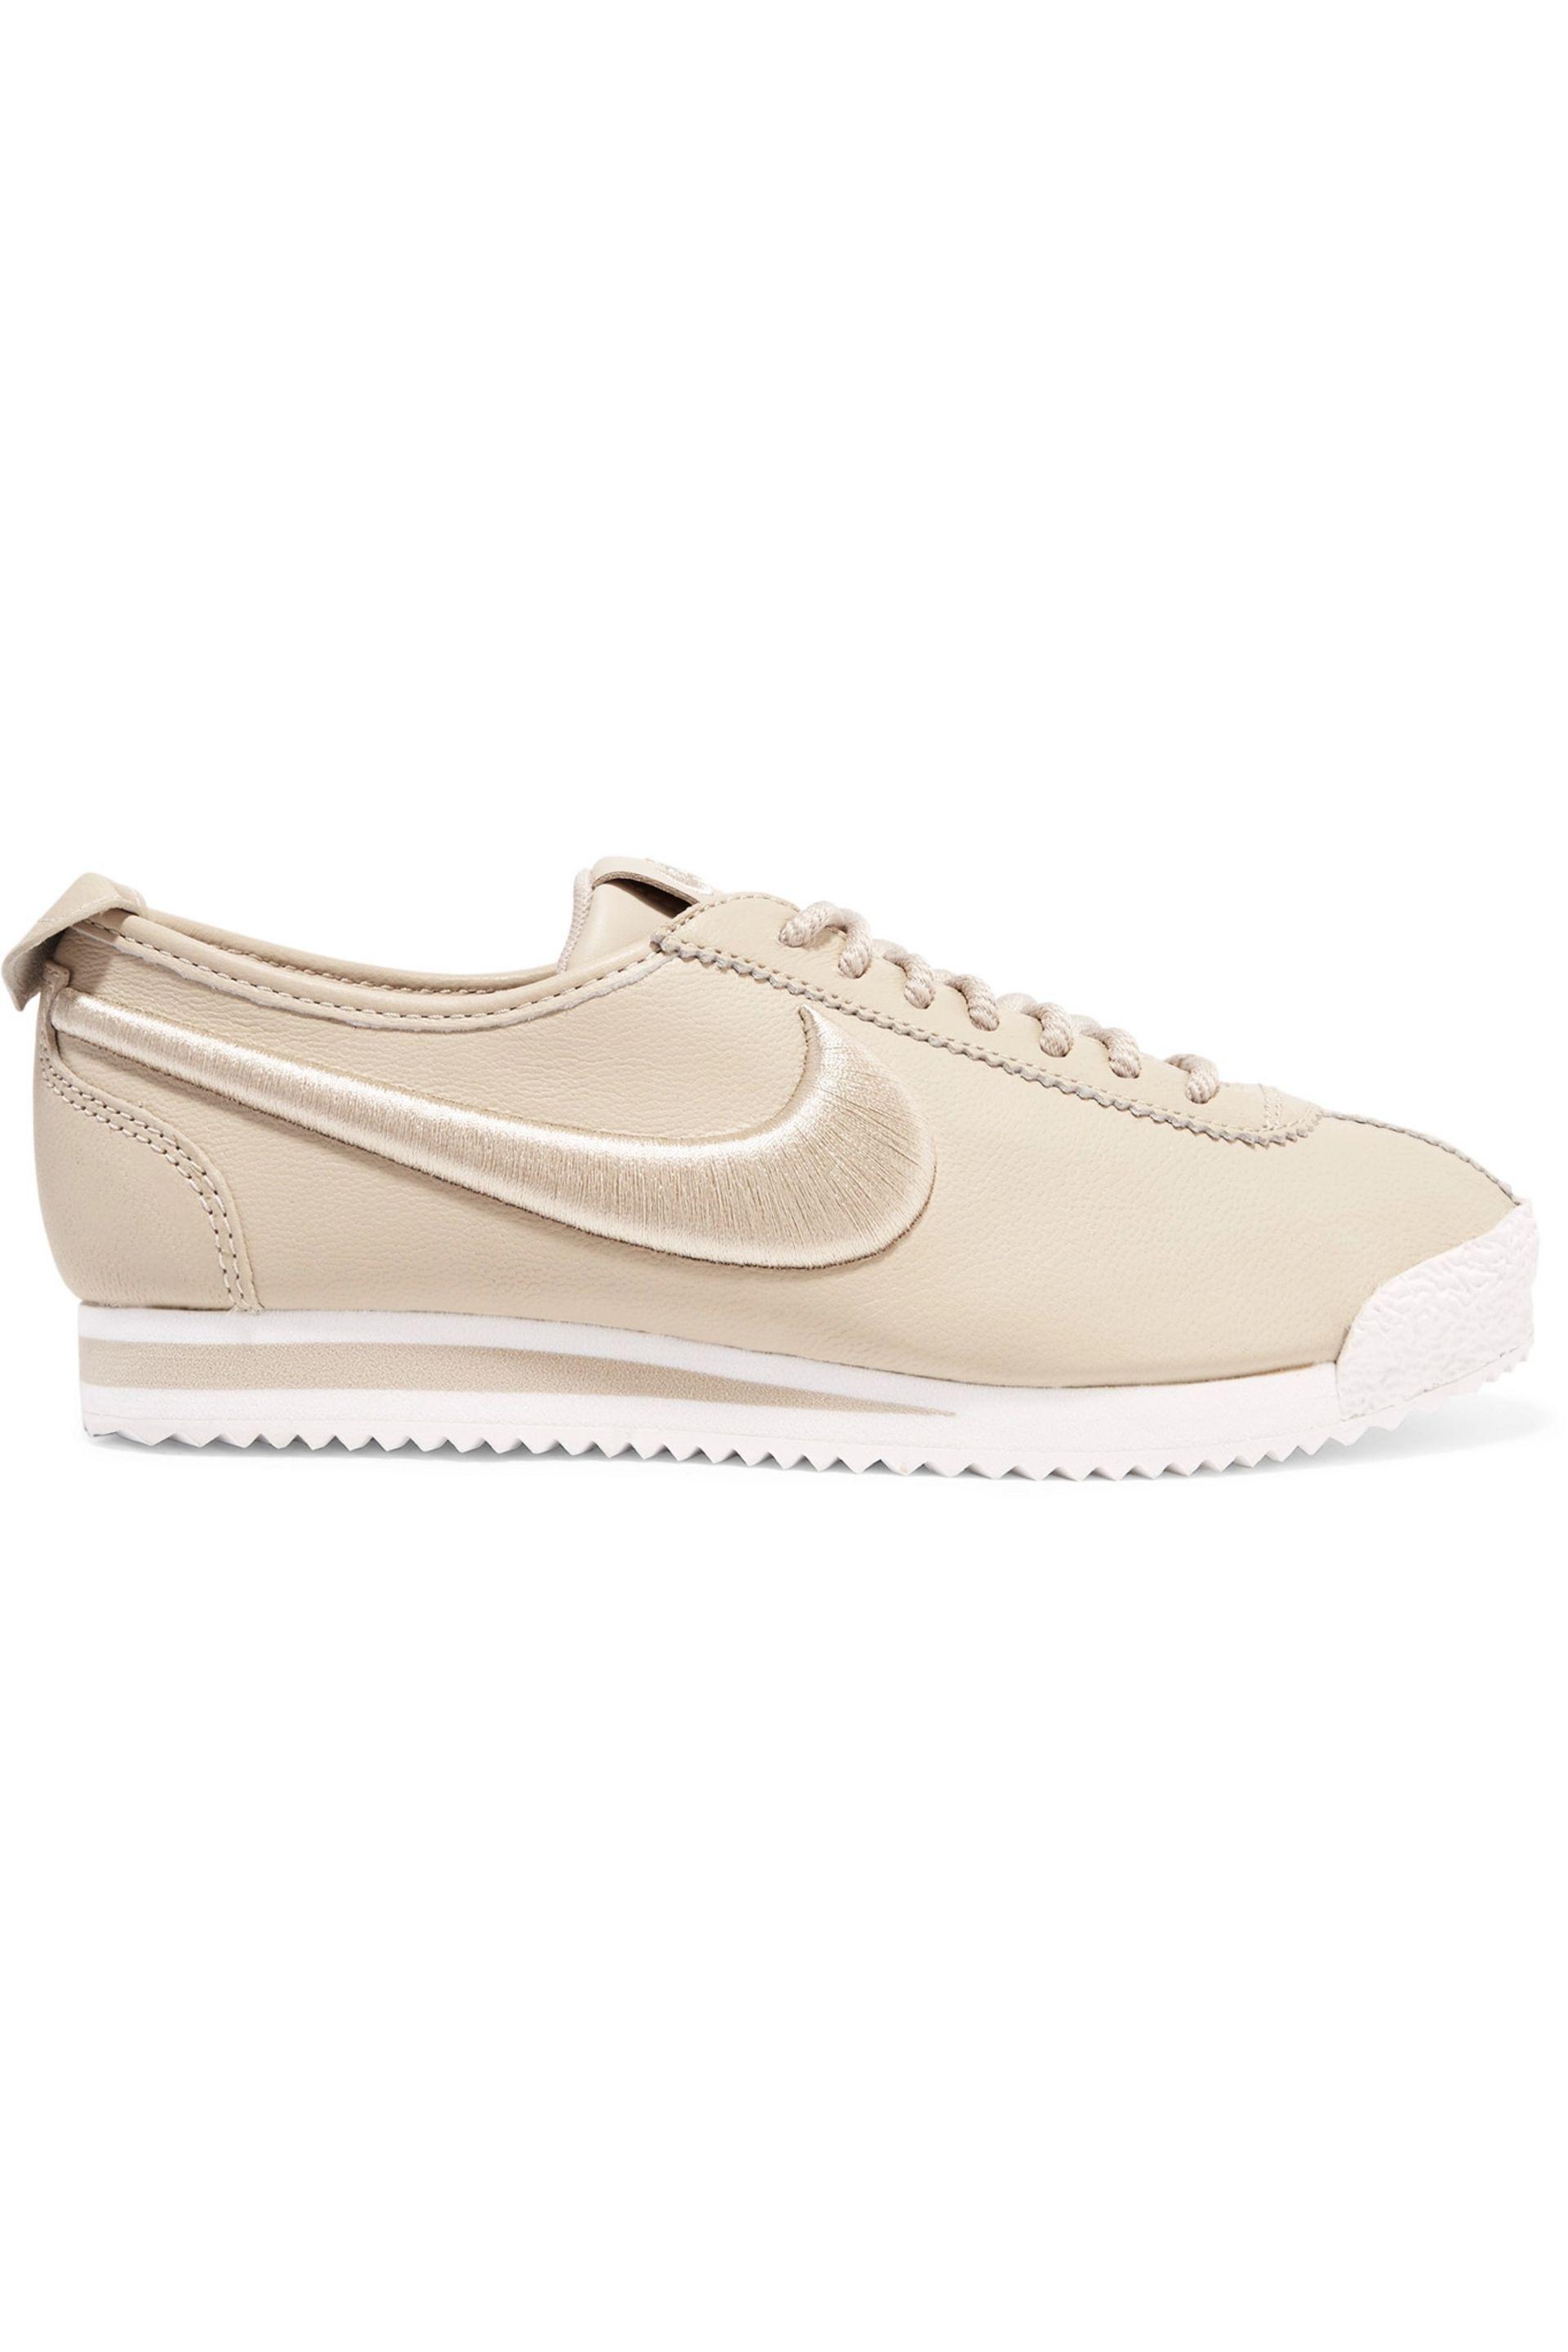 Nike Cortez 72 Si Embroidered Leather Sneakers in Beige (Natural) | Lyst